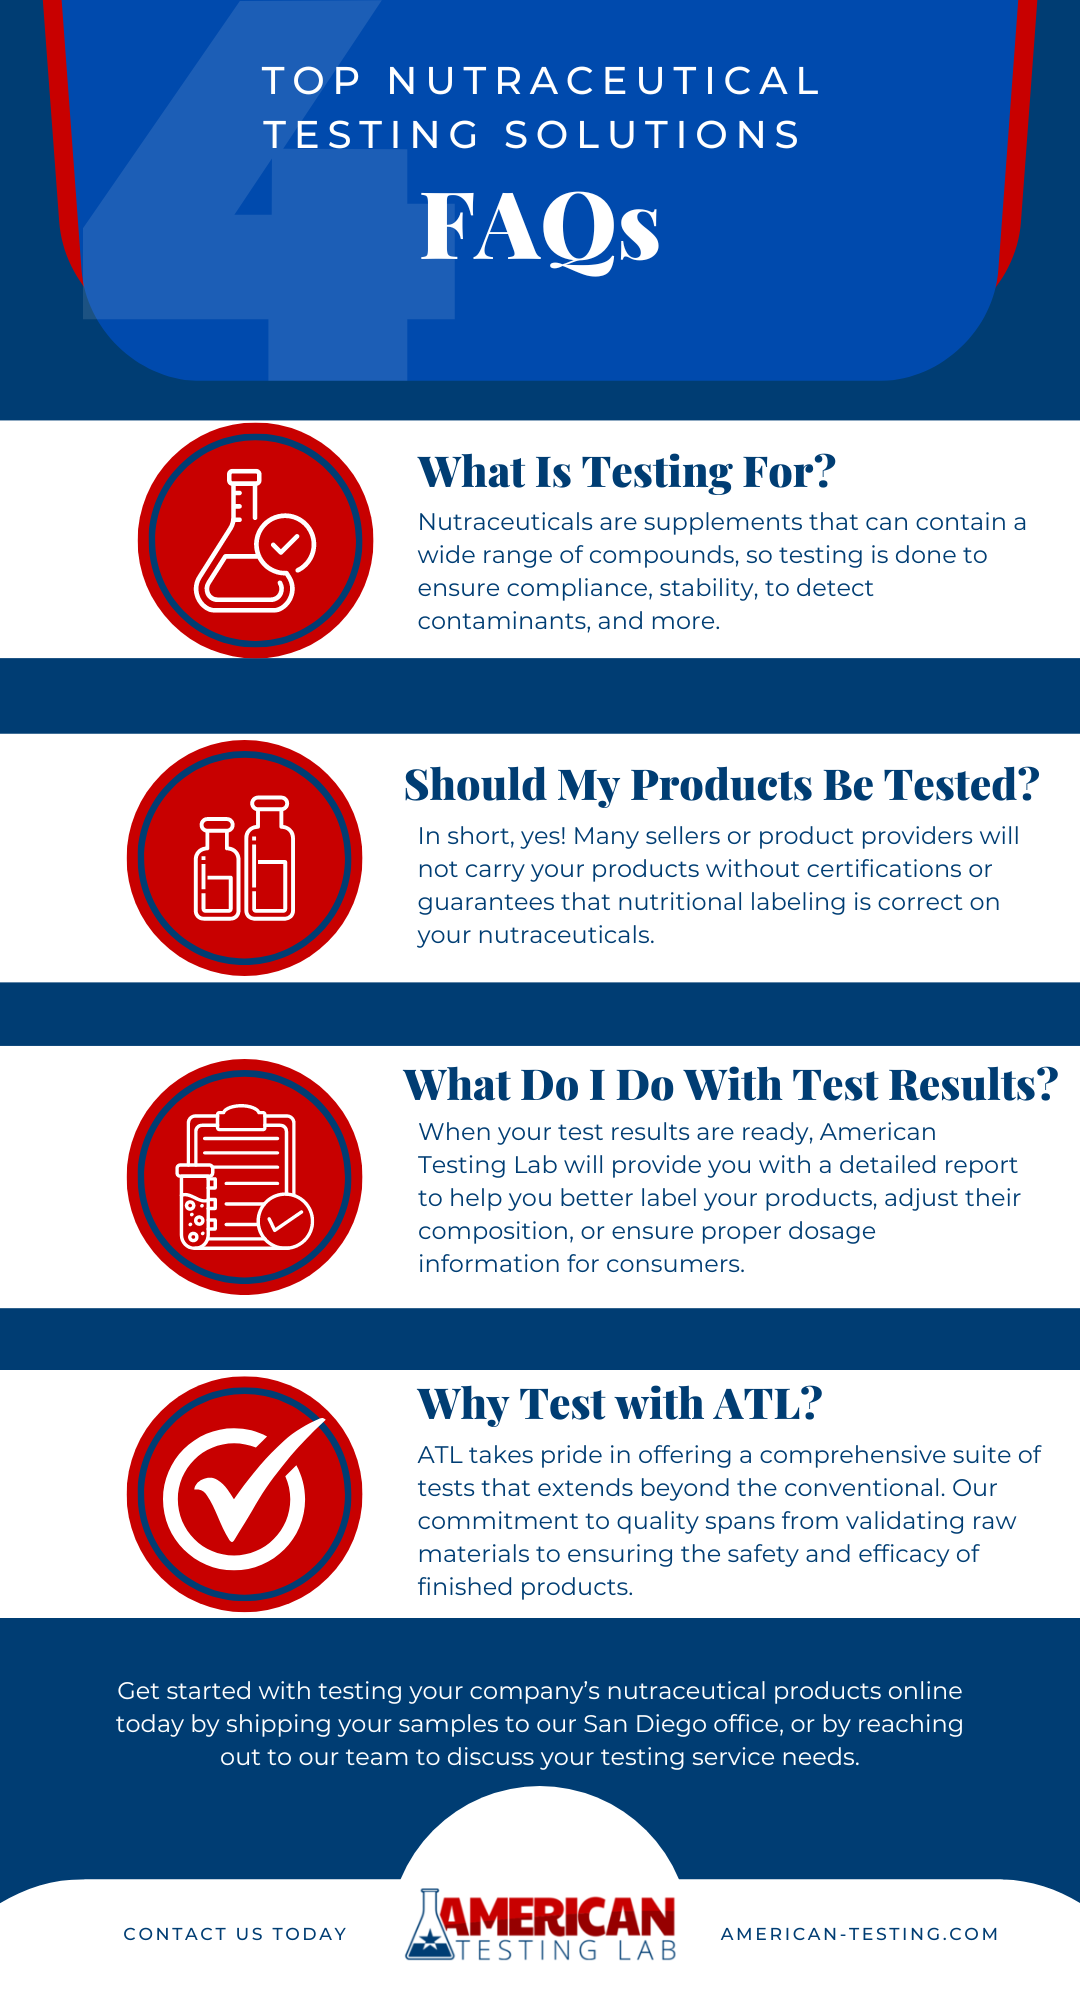 M15094 - Top Nutraceutical Testing Solutions -FAQ